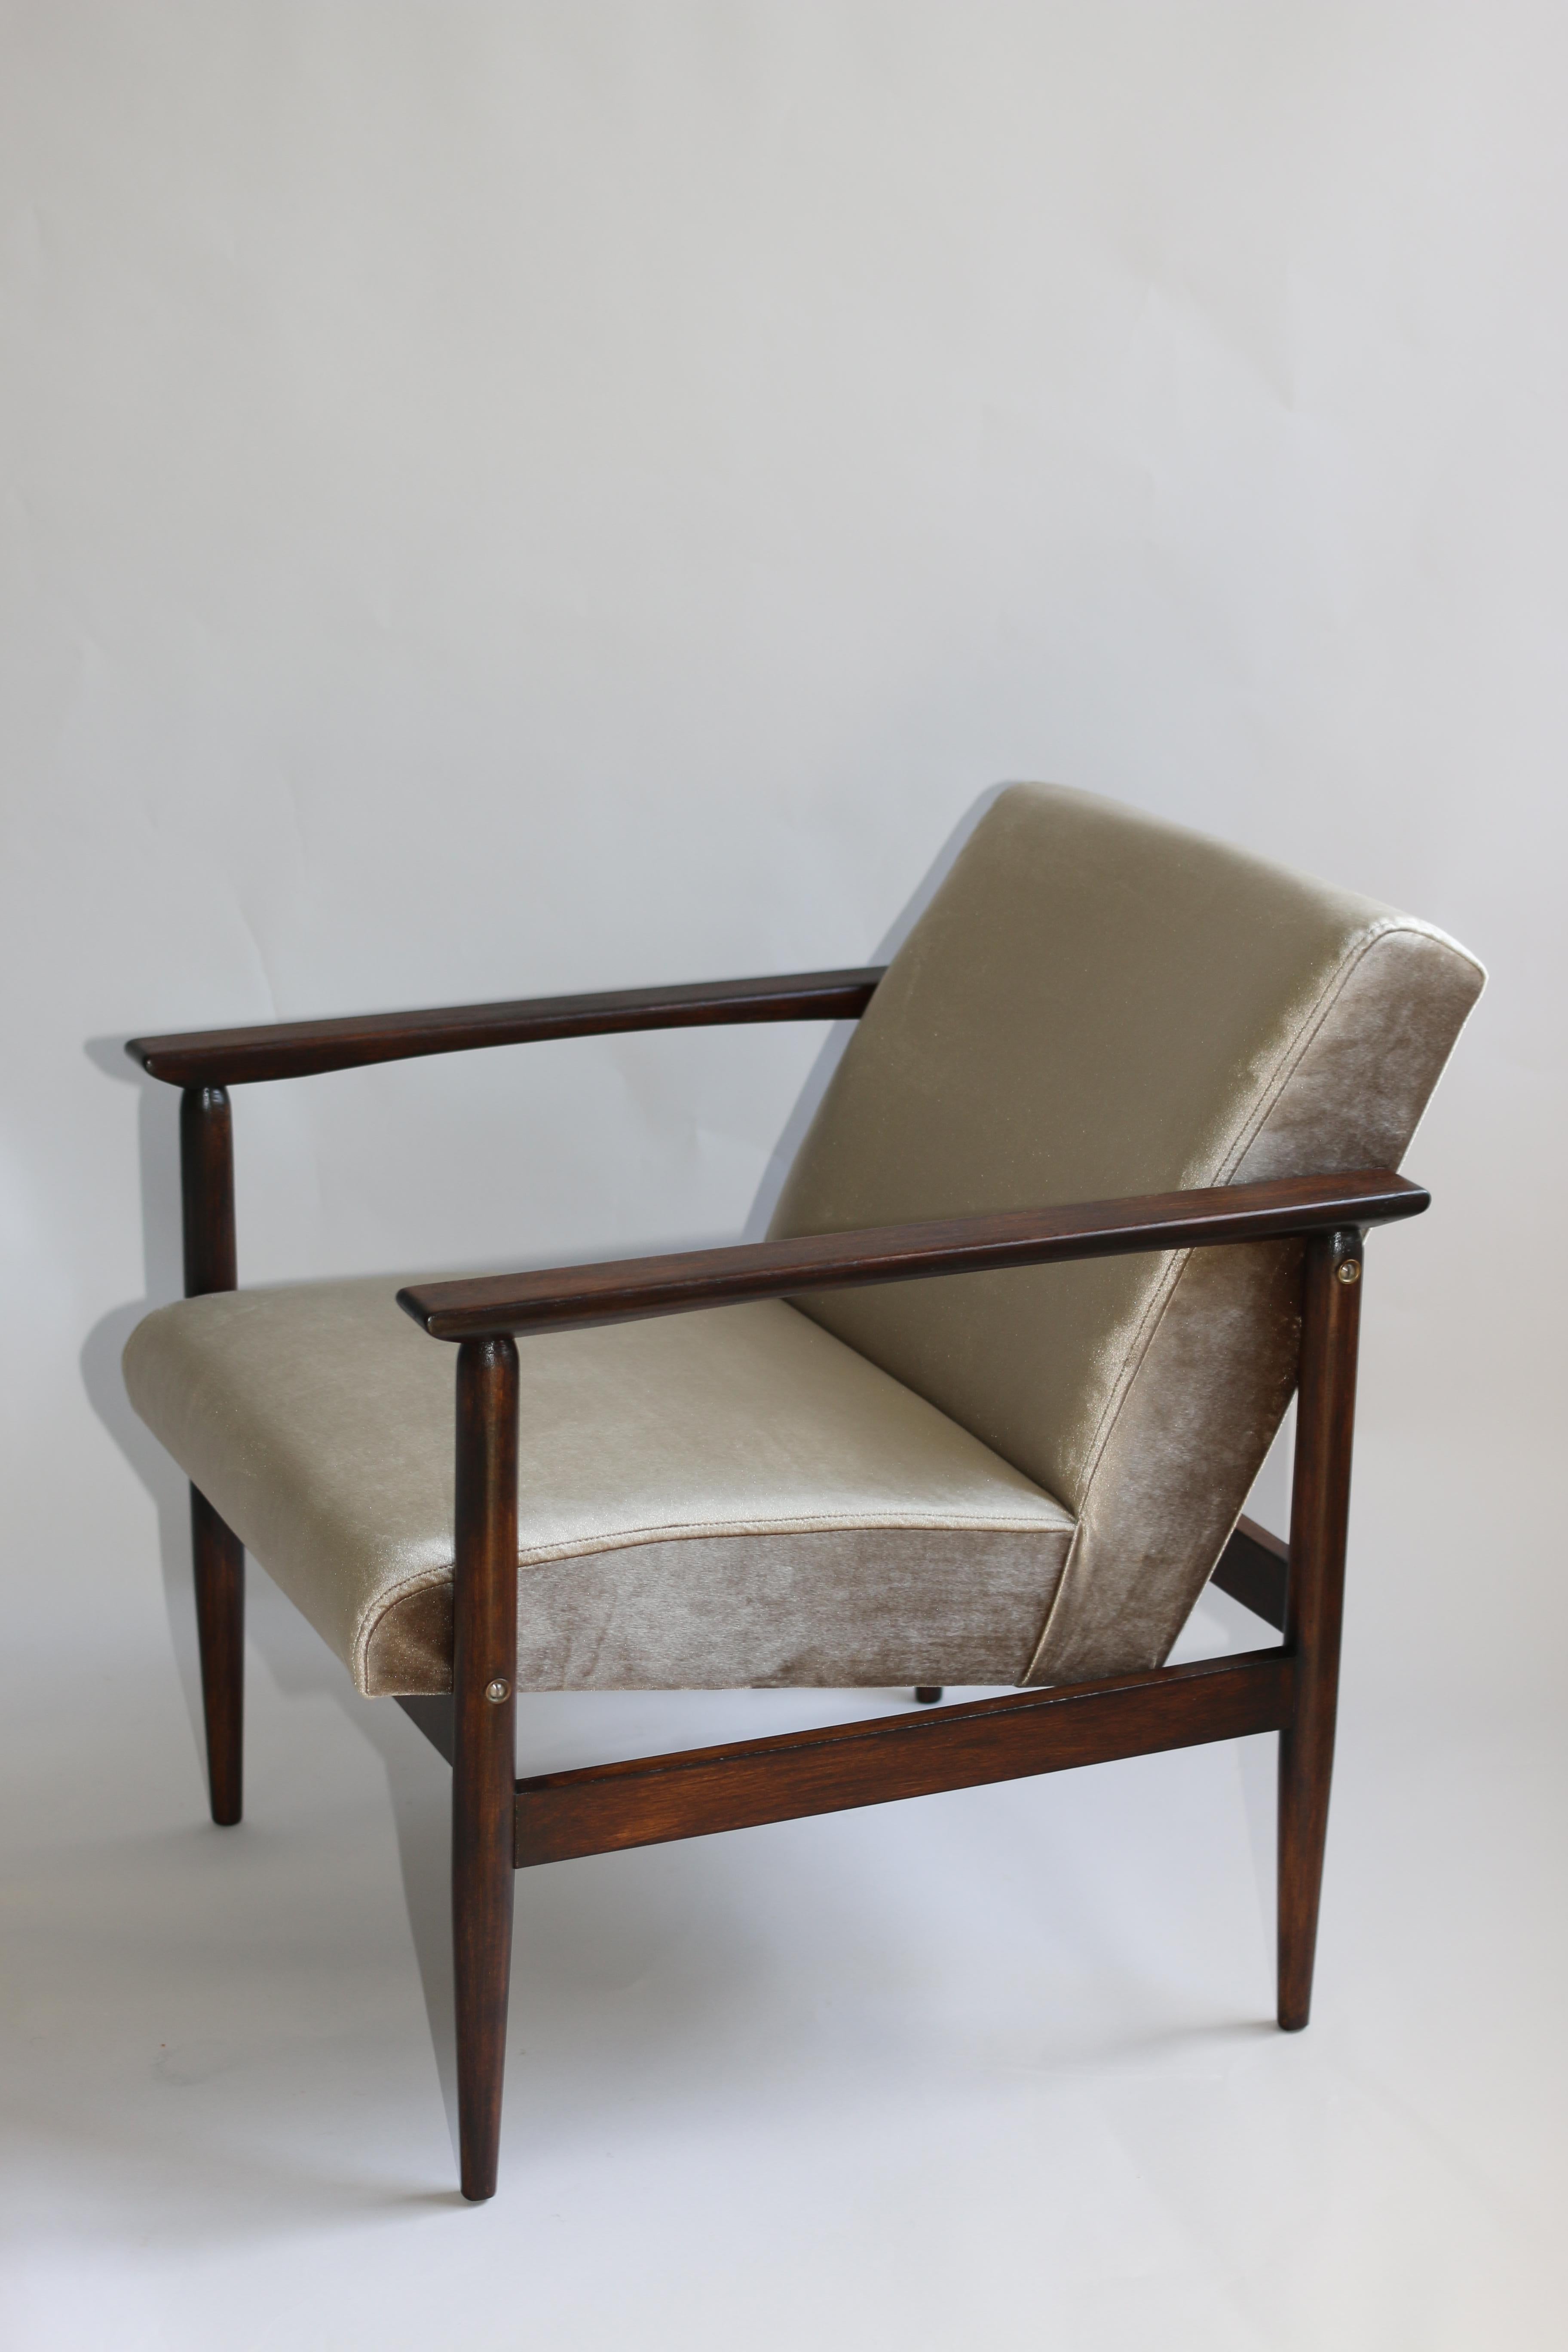 Vintage armchair design in beige made velvet from 1970s, new upholstery covered with velvet fabric in fashionable beige color, finished with wooden chair cushion. Wooden elements in dark oak color. Perfect condition. 

Dimension: H 68 x W 60 x D 63.